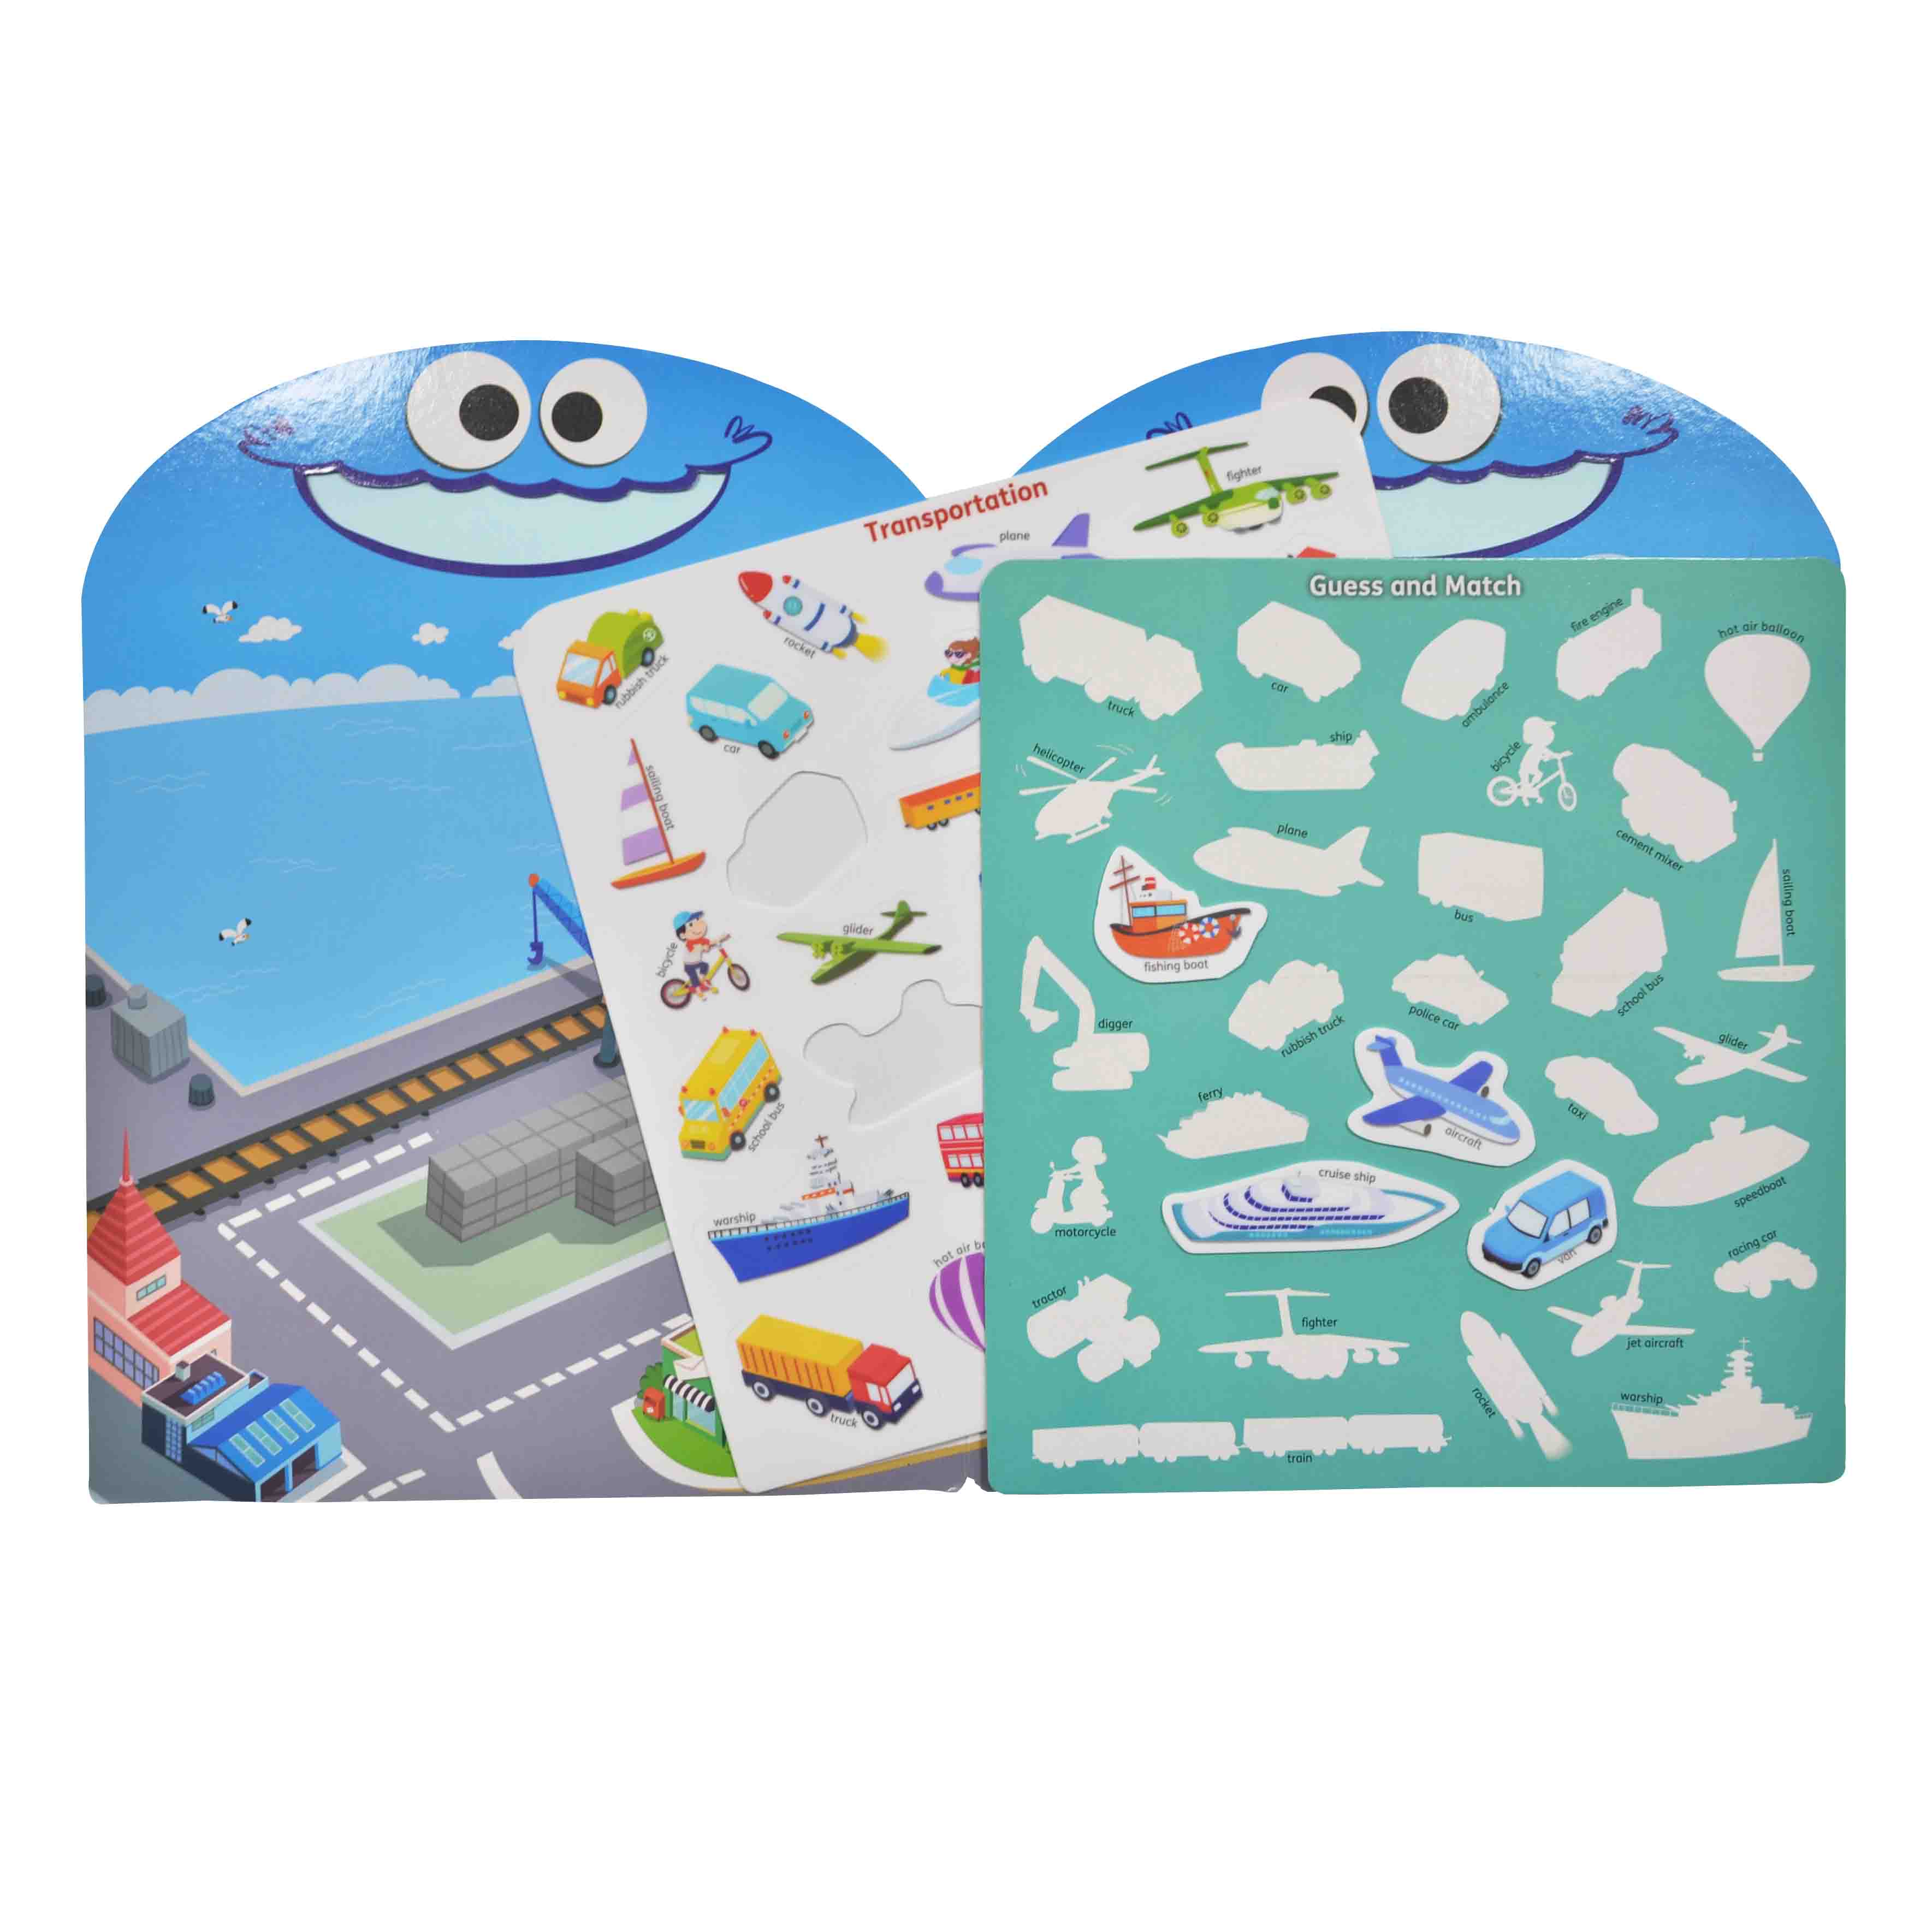 Transportation Play And Learn High Quality Reusable Sticker Board Manufacturer